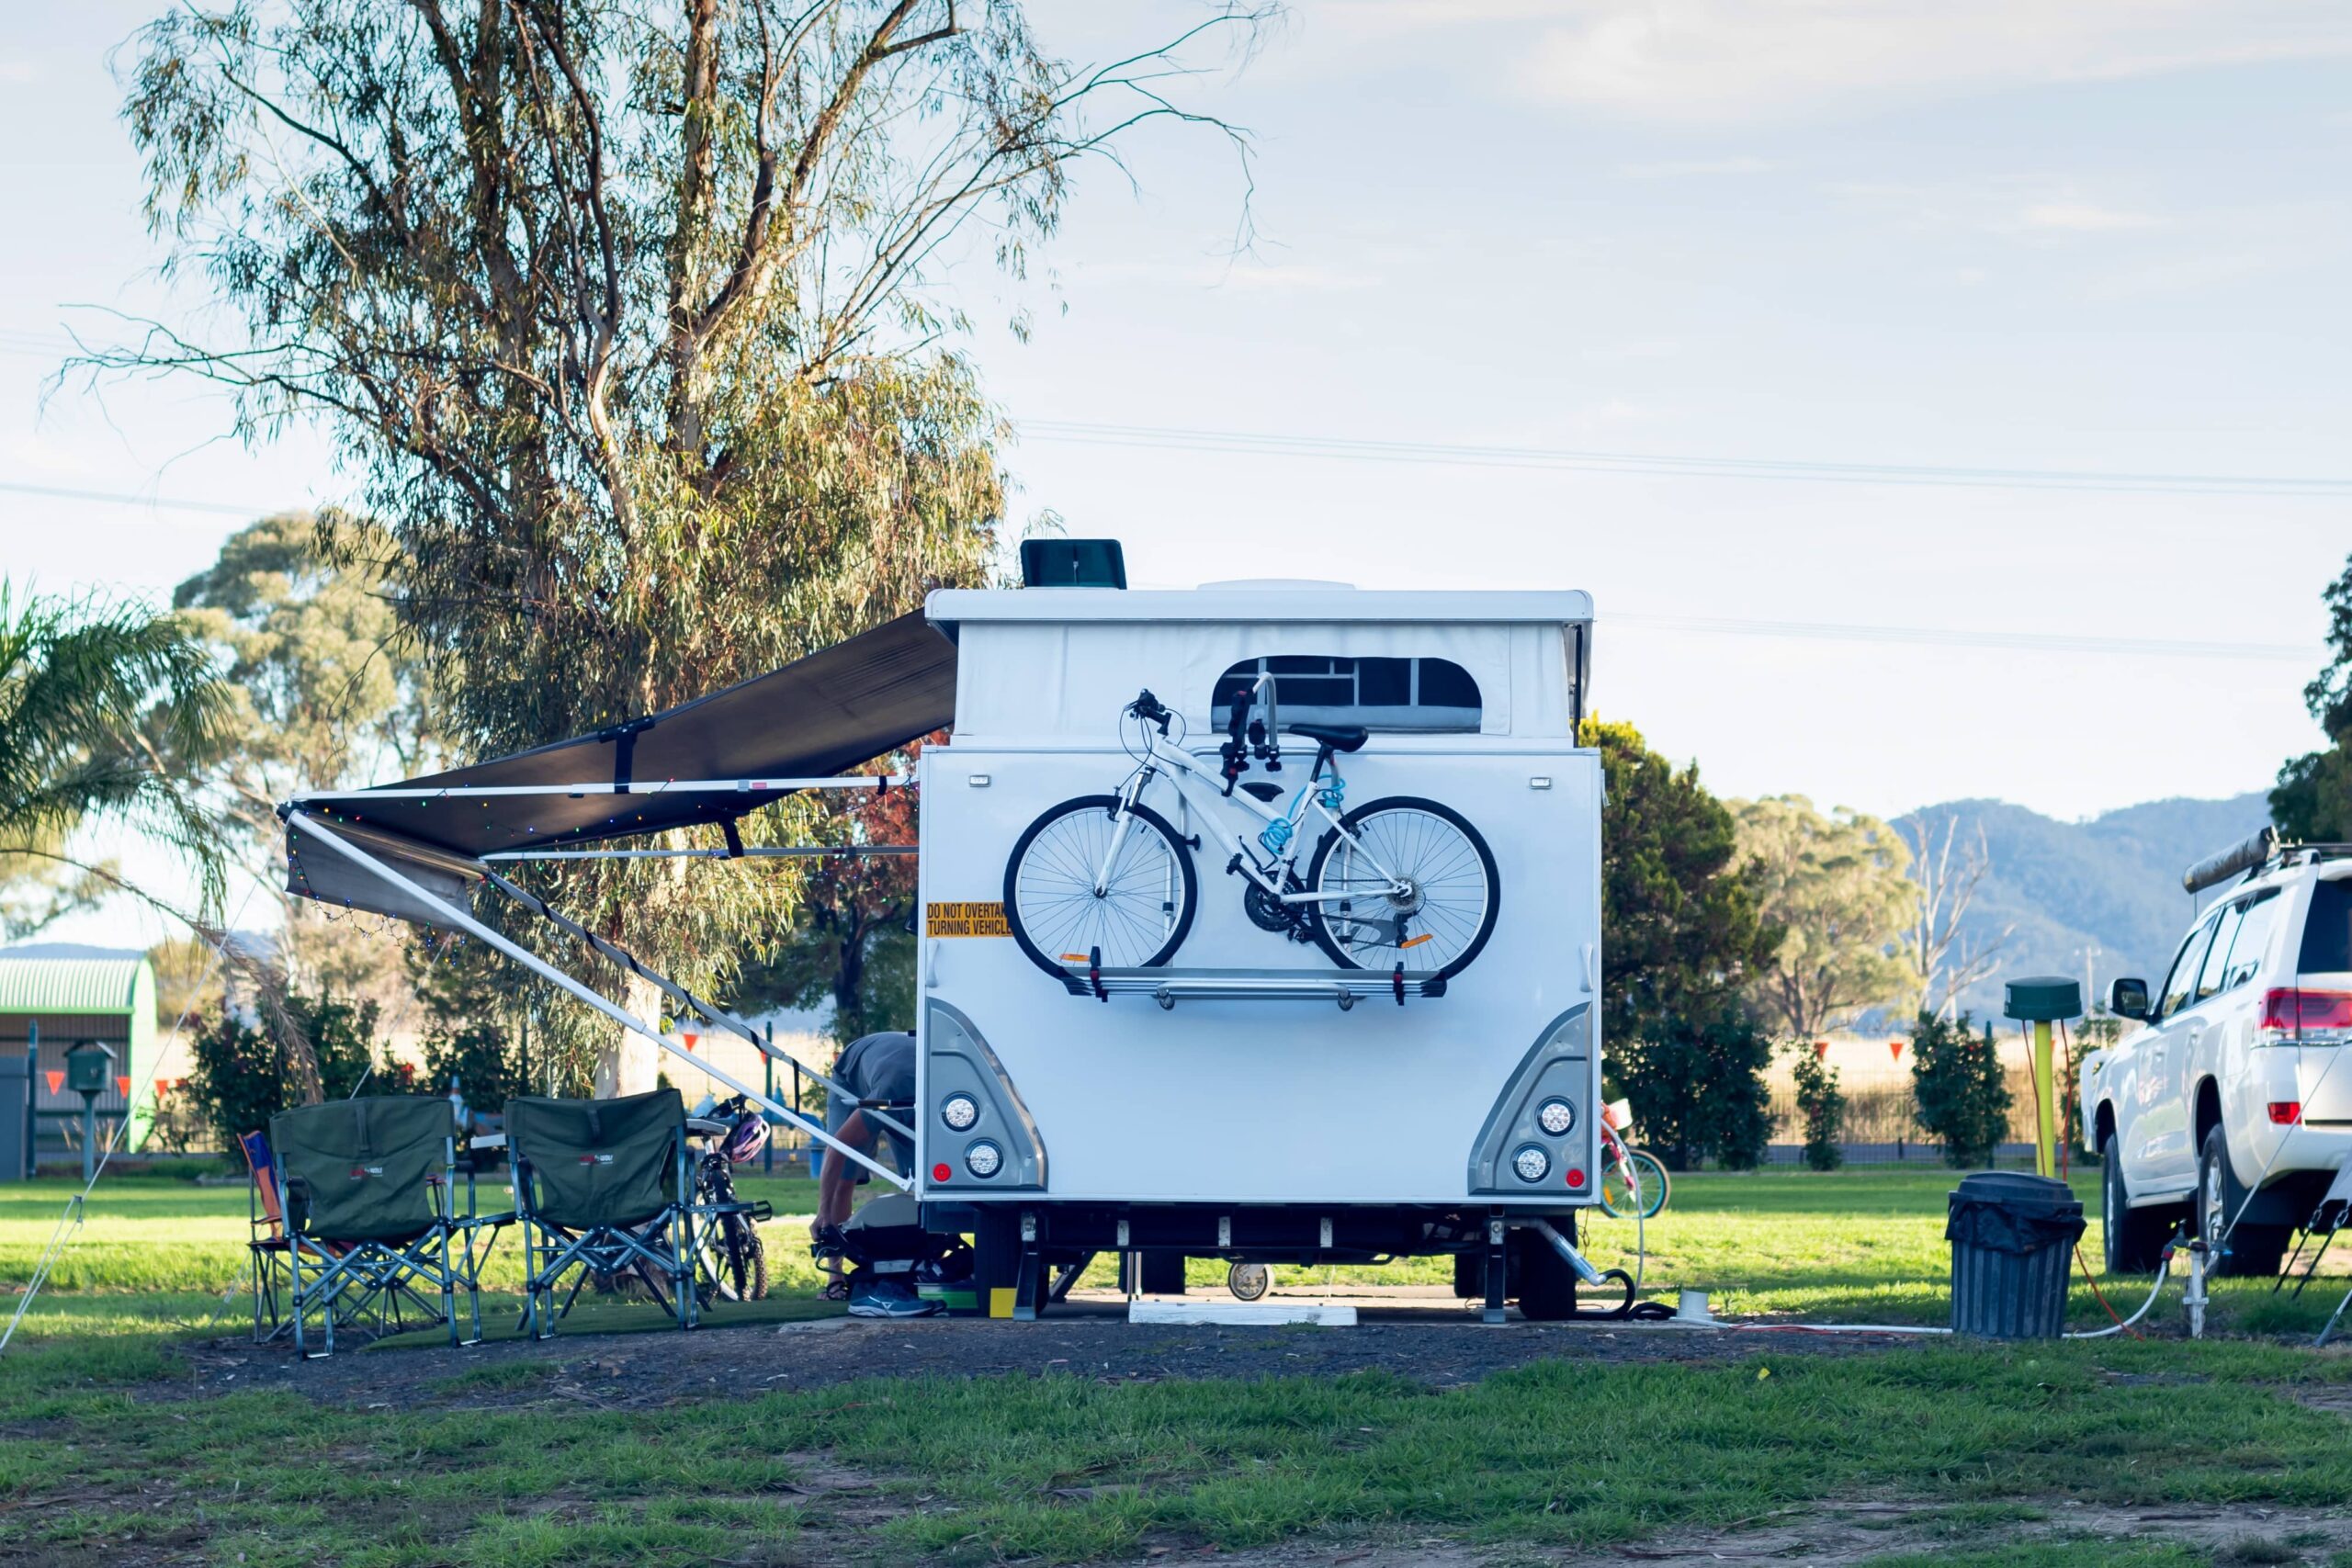 rv-caravan-with-bike-on-the-back-camping-at-the-ca-2022-11-15-14-04-23-utc (1)